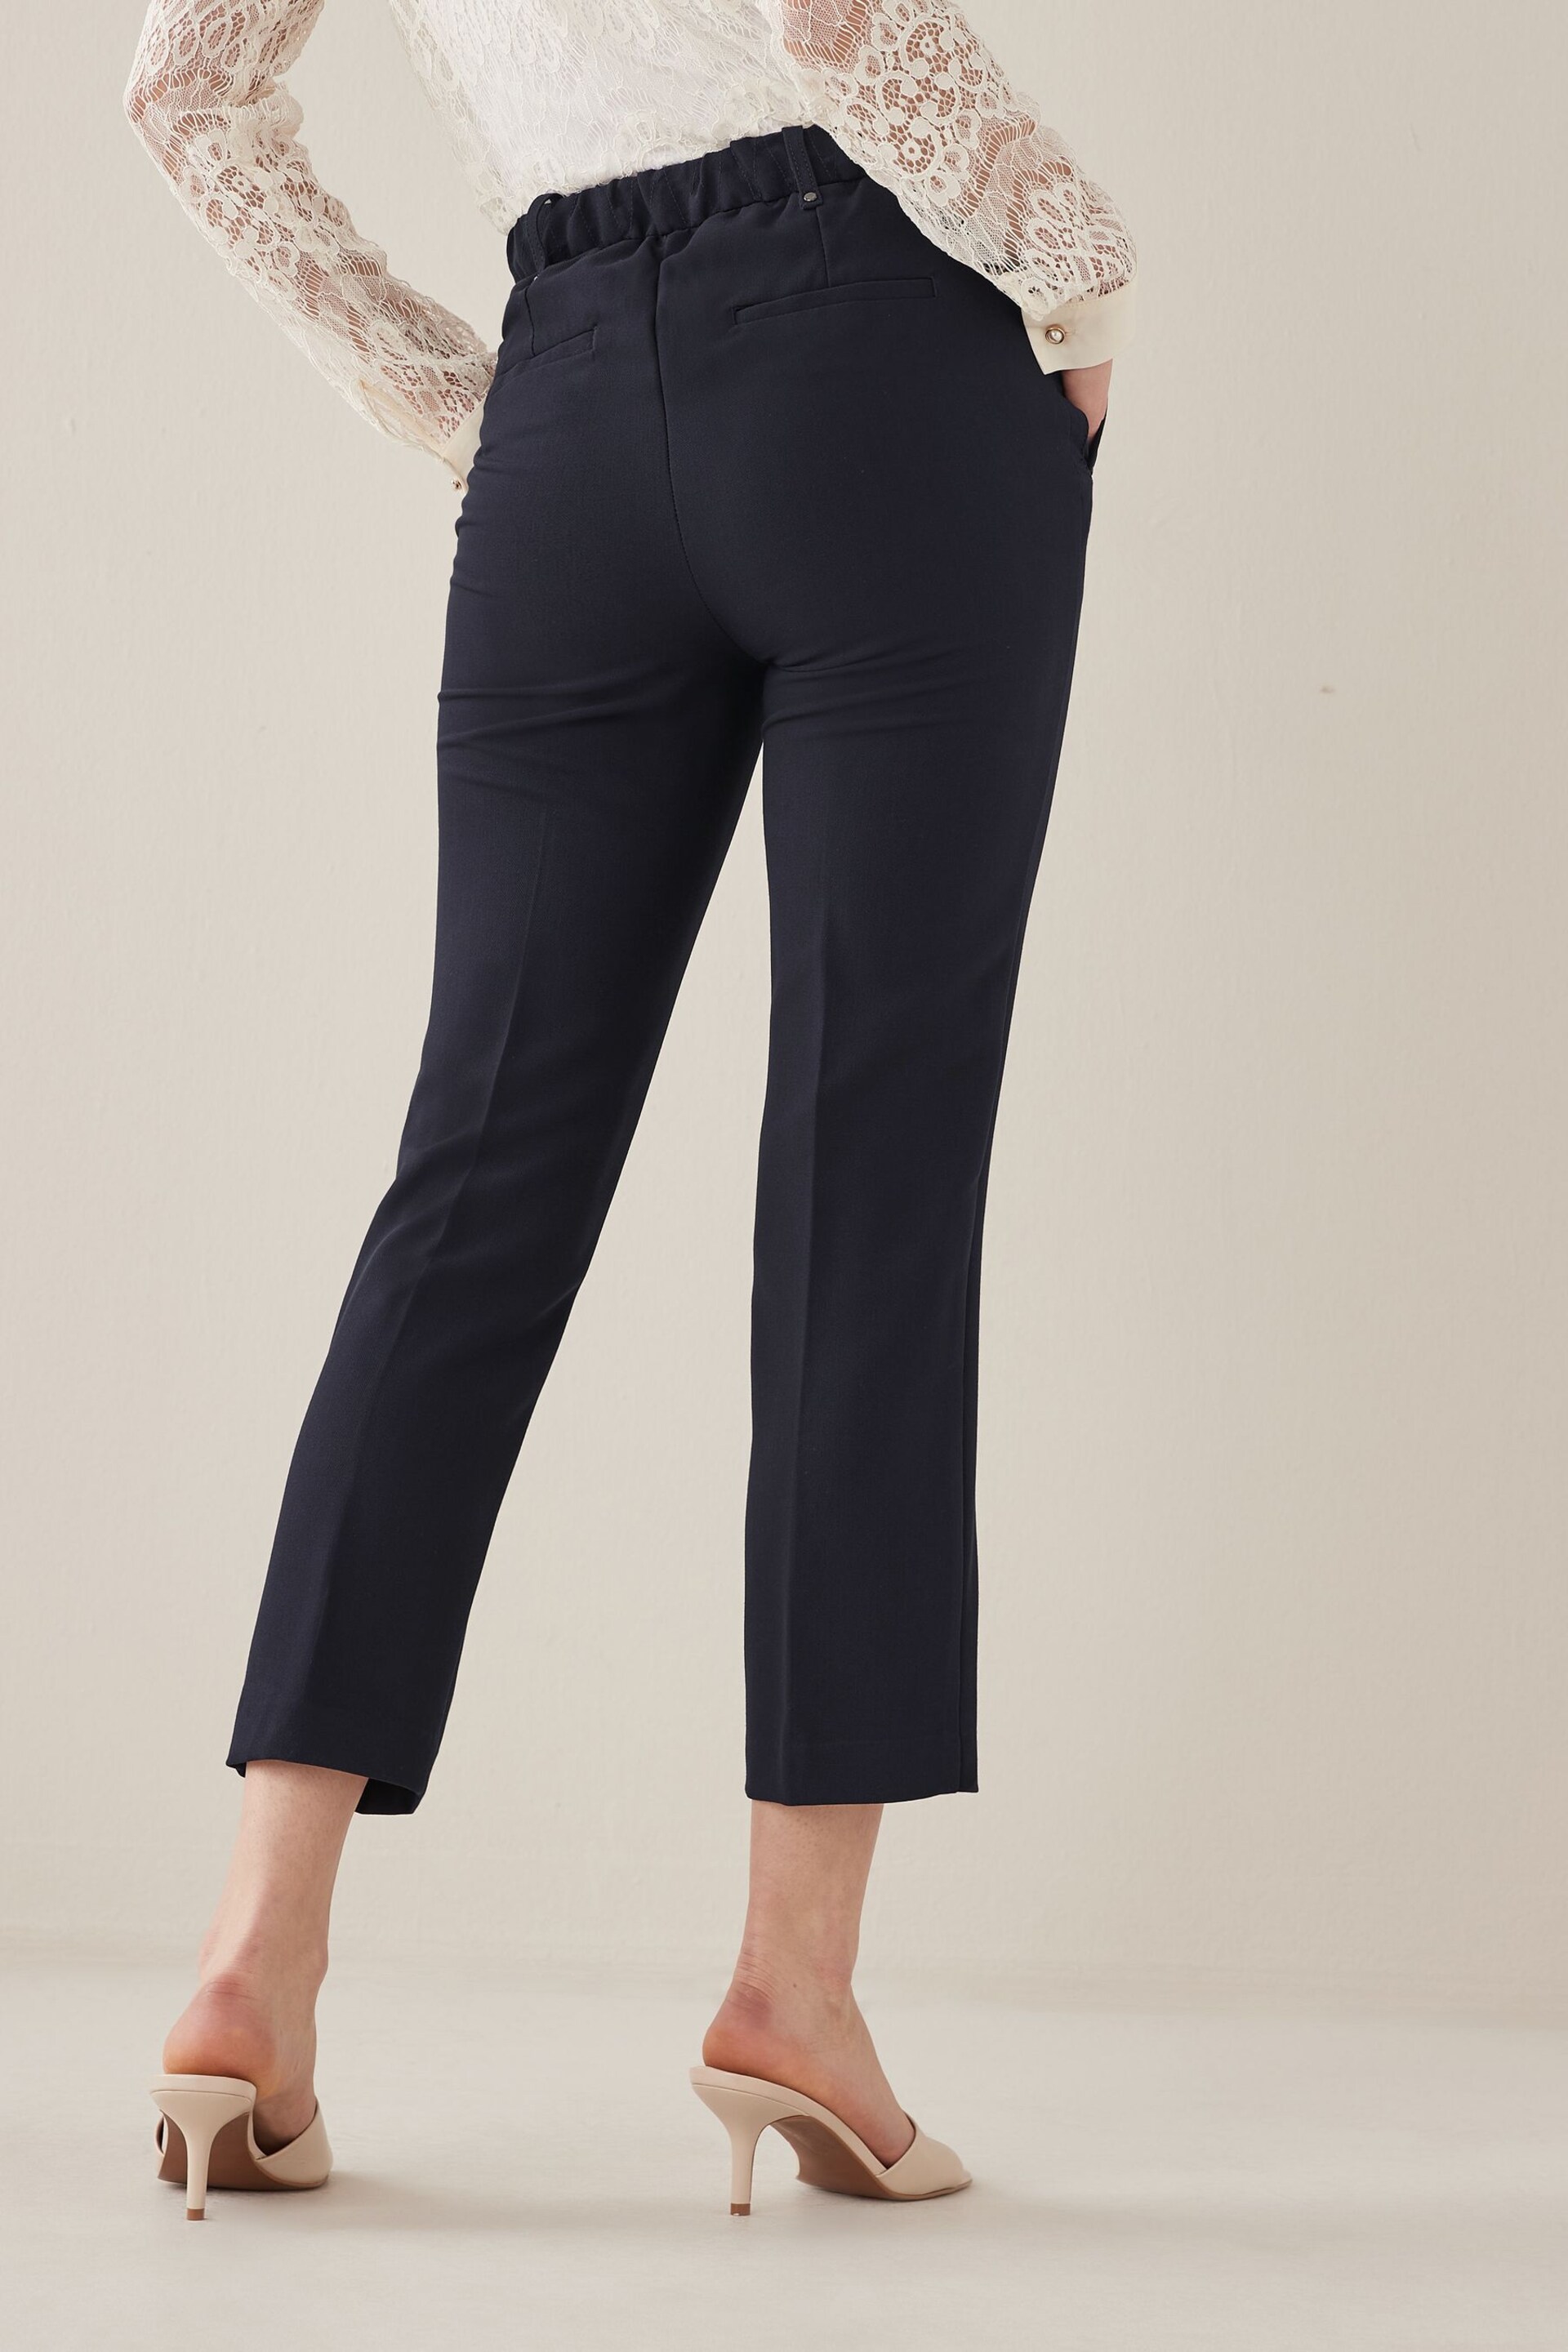 Navy Blue Tailored Elastic Back Straight Leg Pull On Trousers - Image 2 of 5